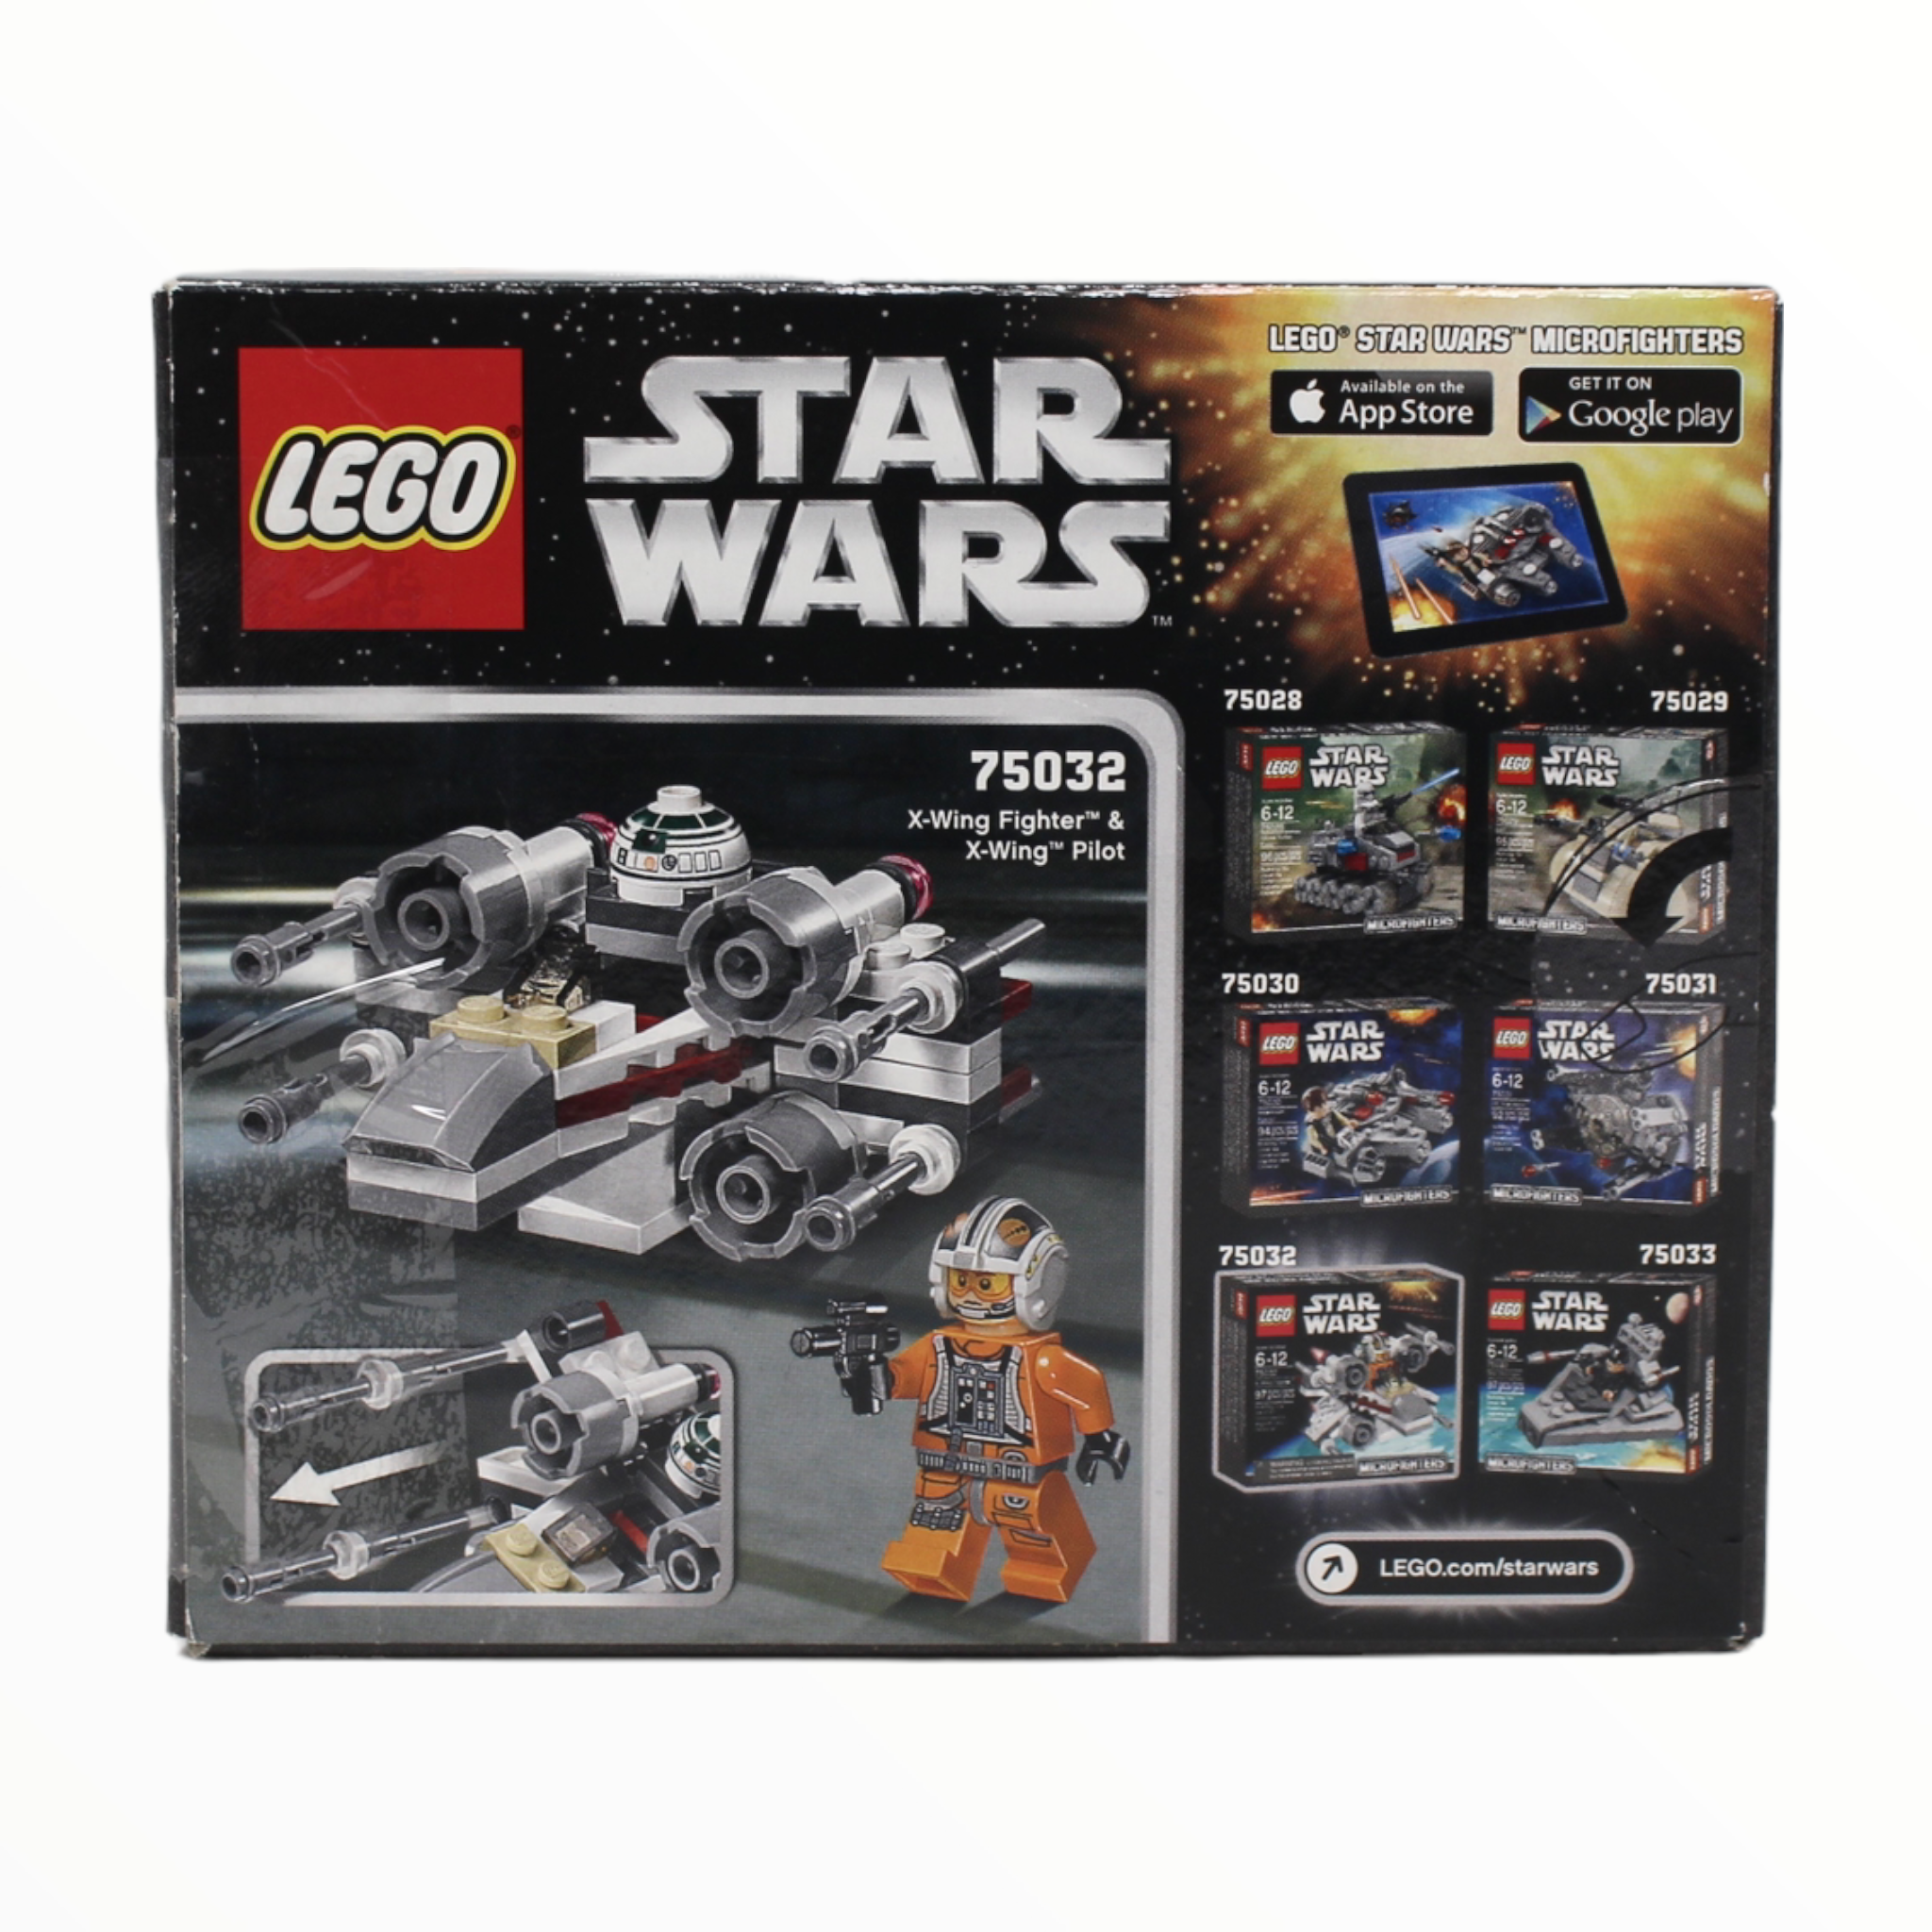 Certified Used Set 75032 Star Wars X-Wing Fighter Microfighter (2014)